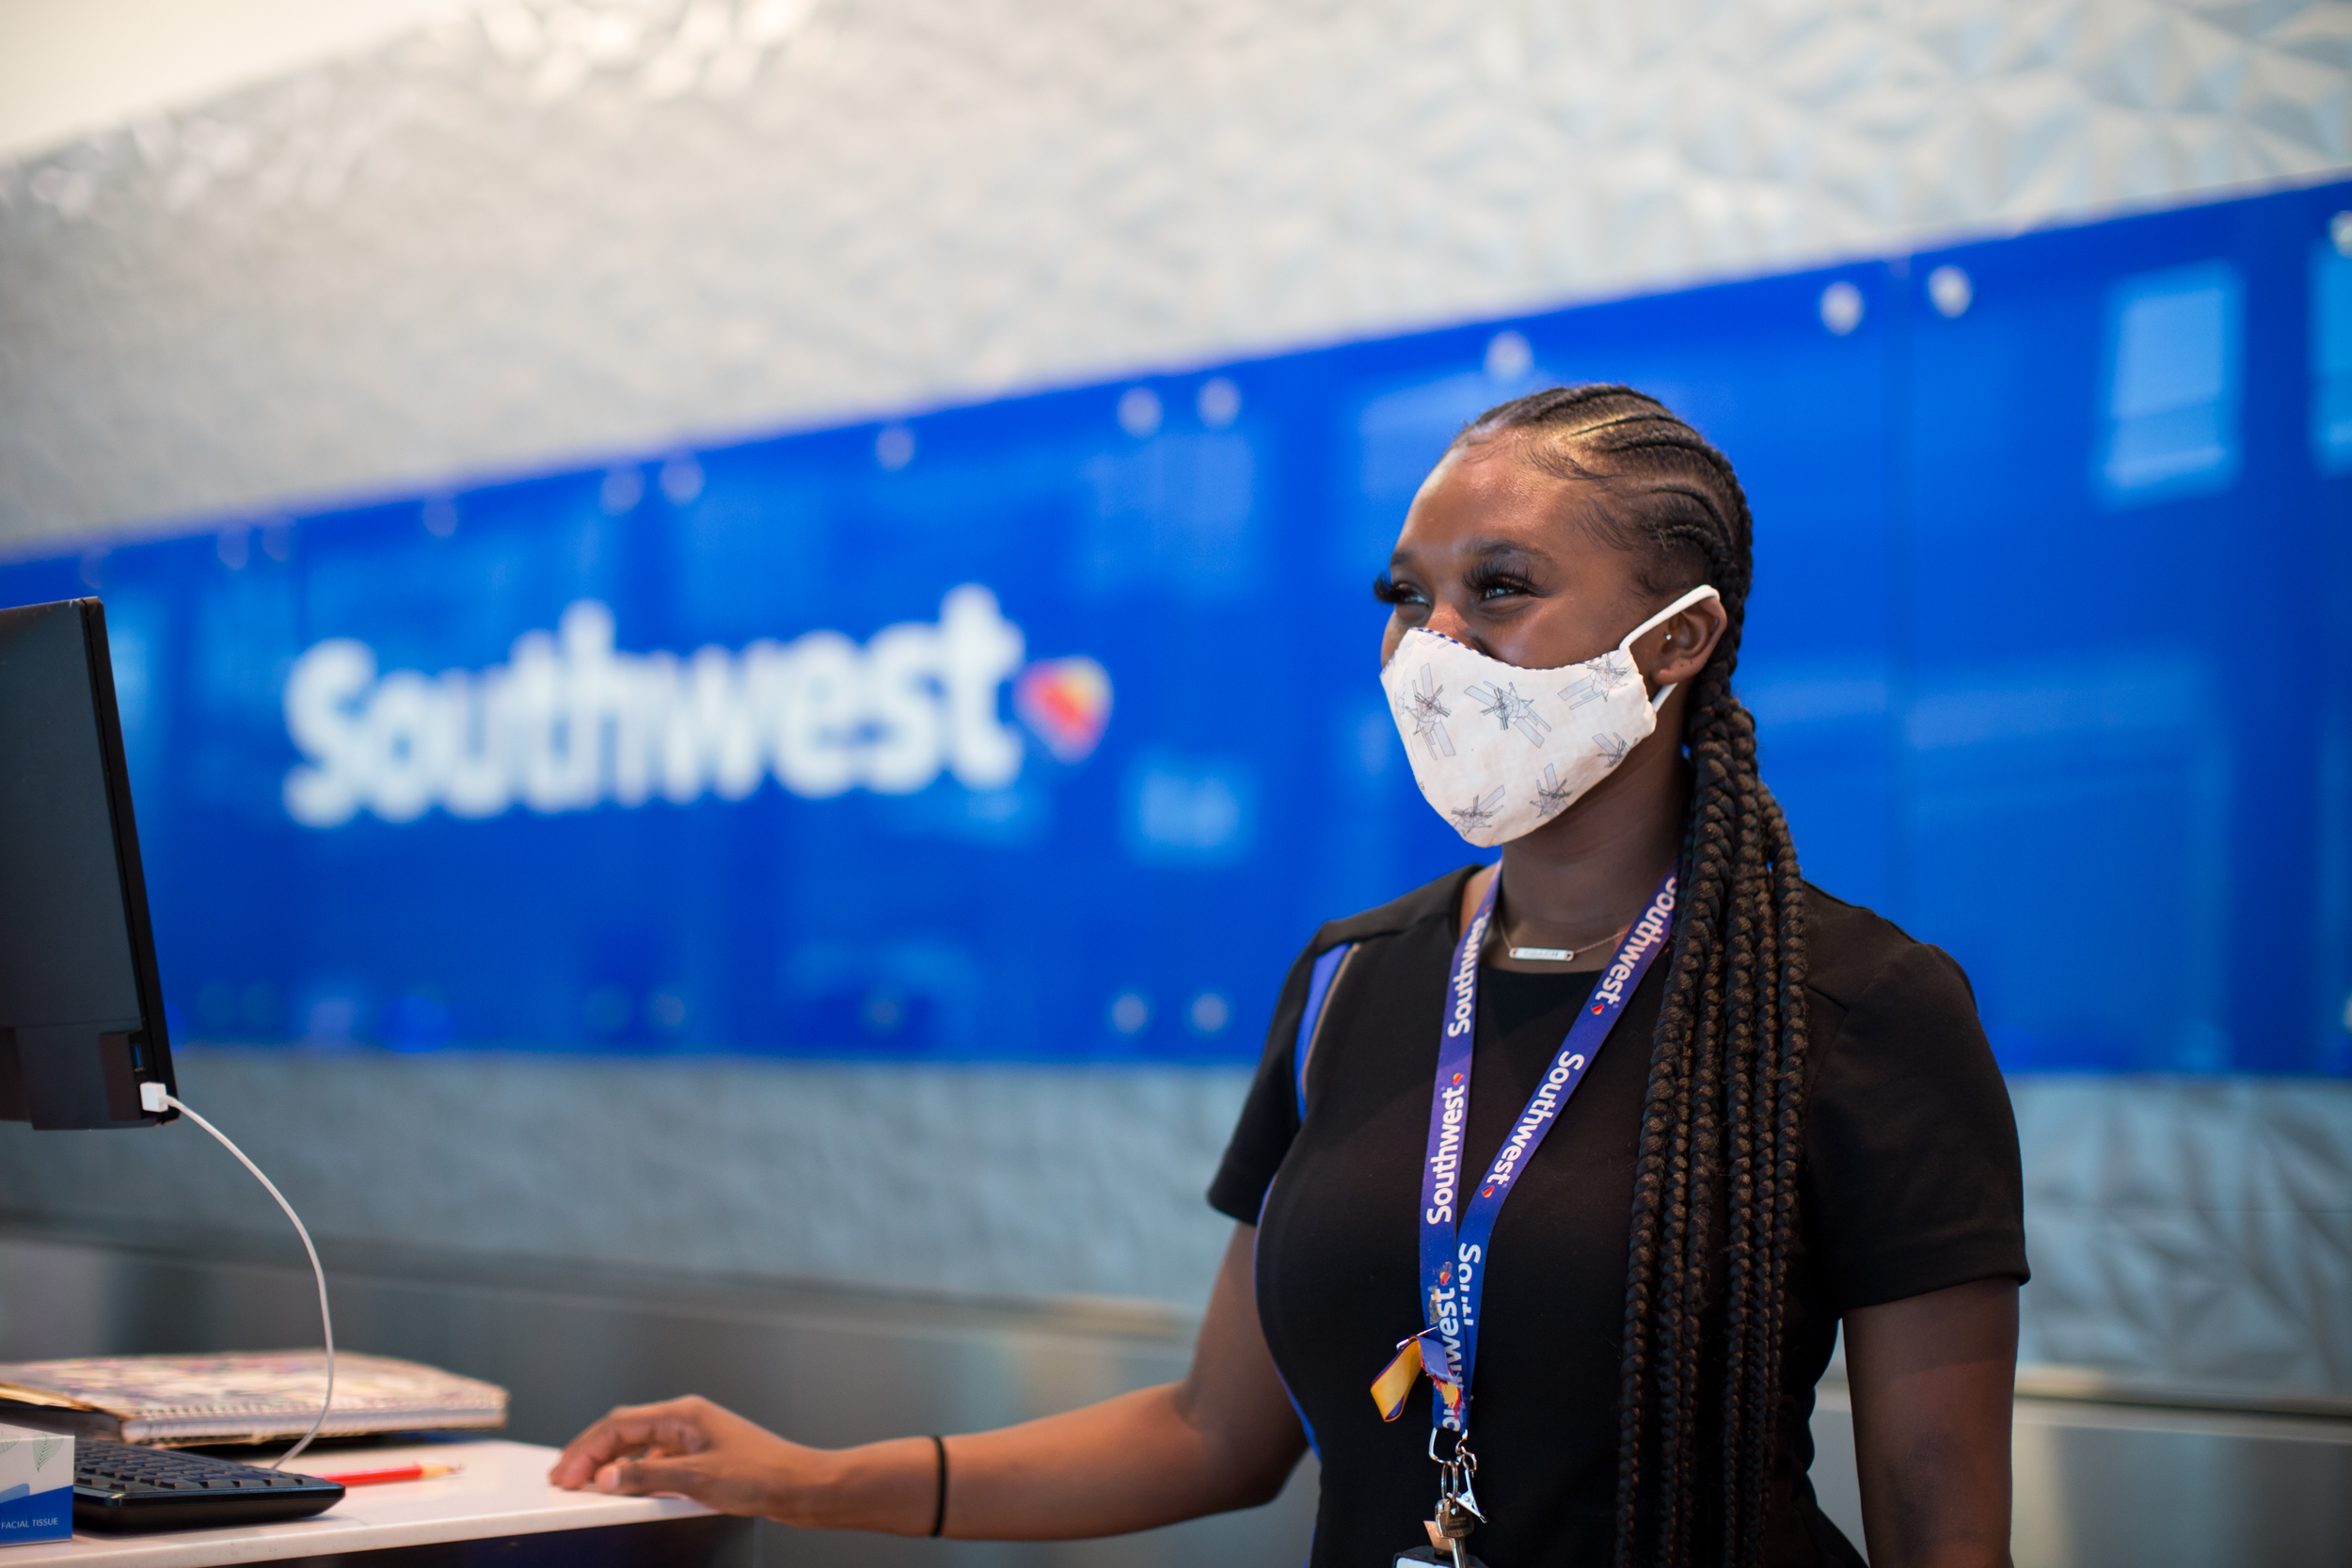 southwest travel funds extension covid